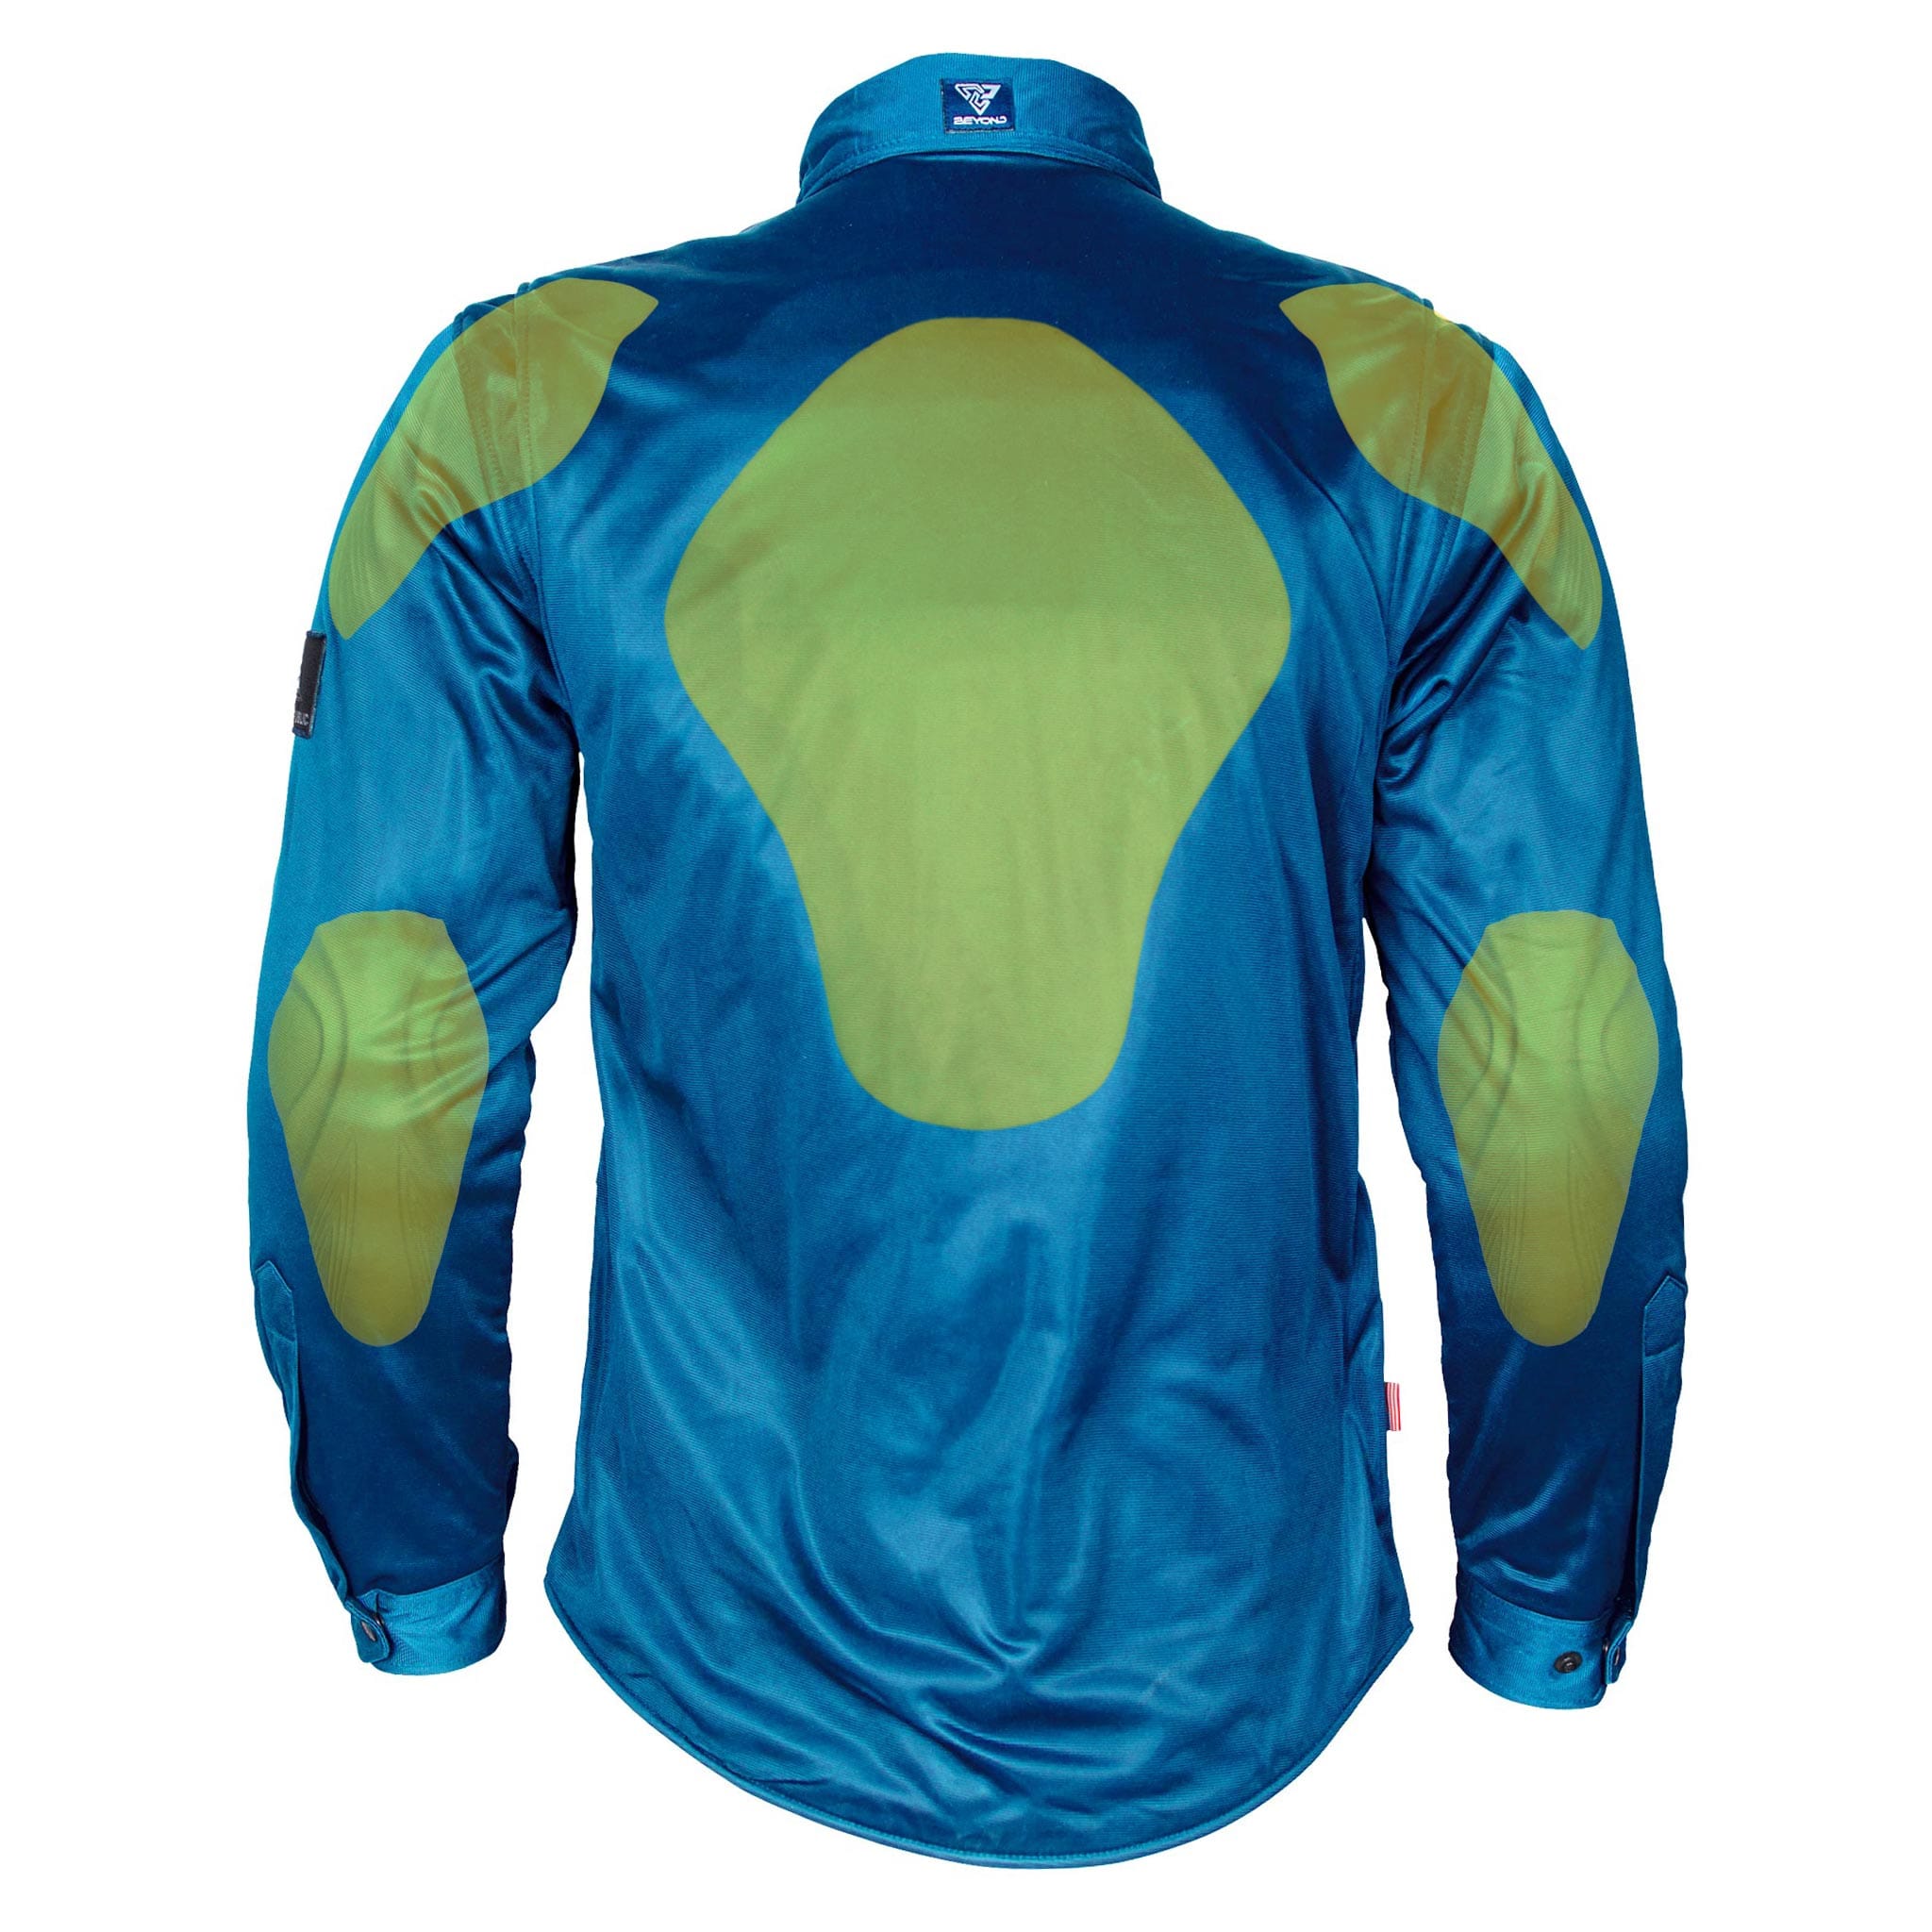 Ultra Protective Shirt - Teal Solid with Pads